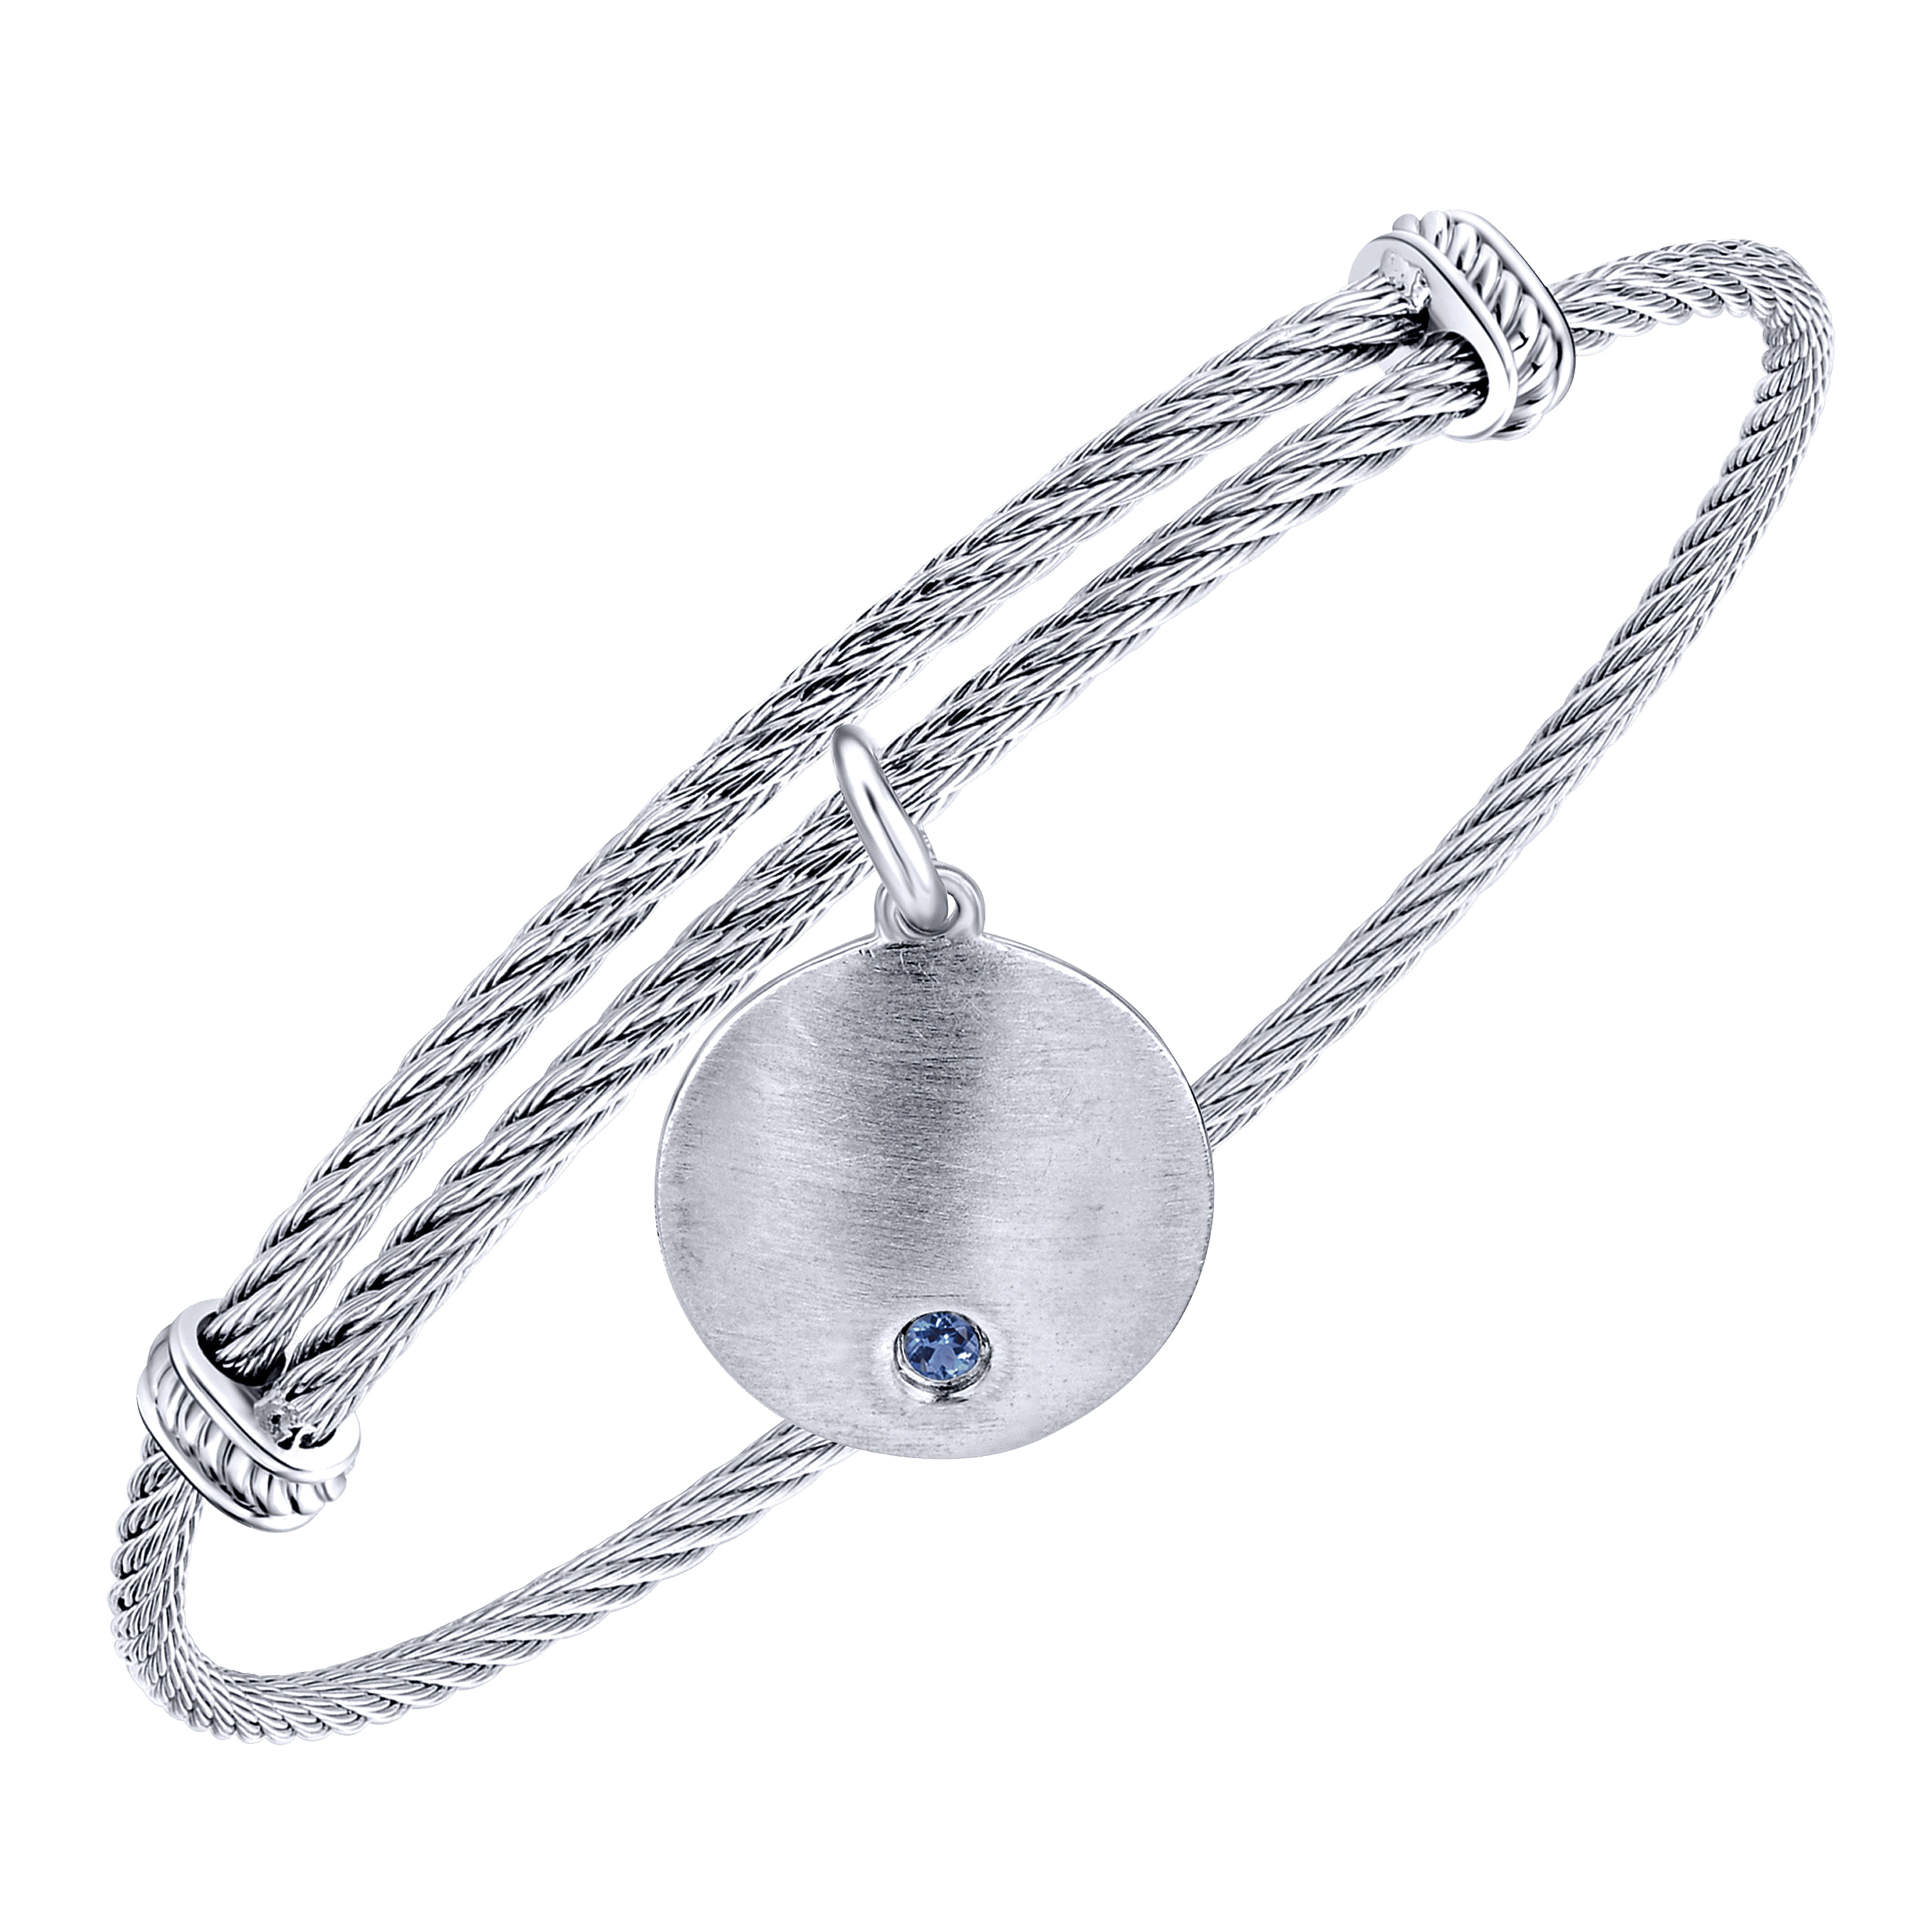 Adjustable Stainless Steel Bangle with Round Sterling Silver Sapphire Stone Disc Charm